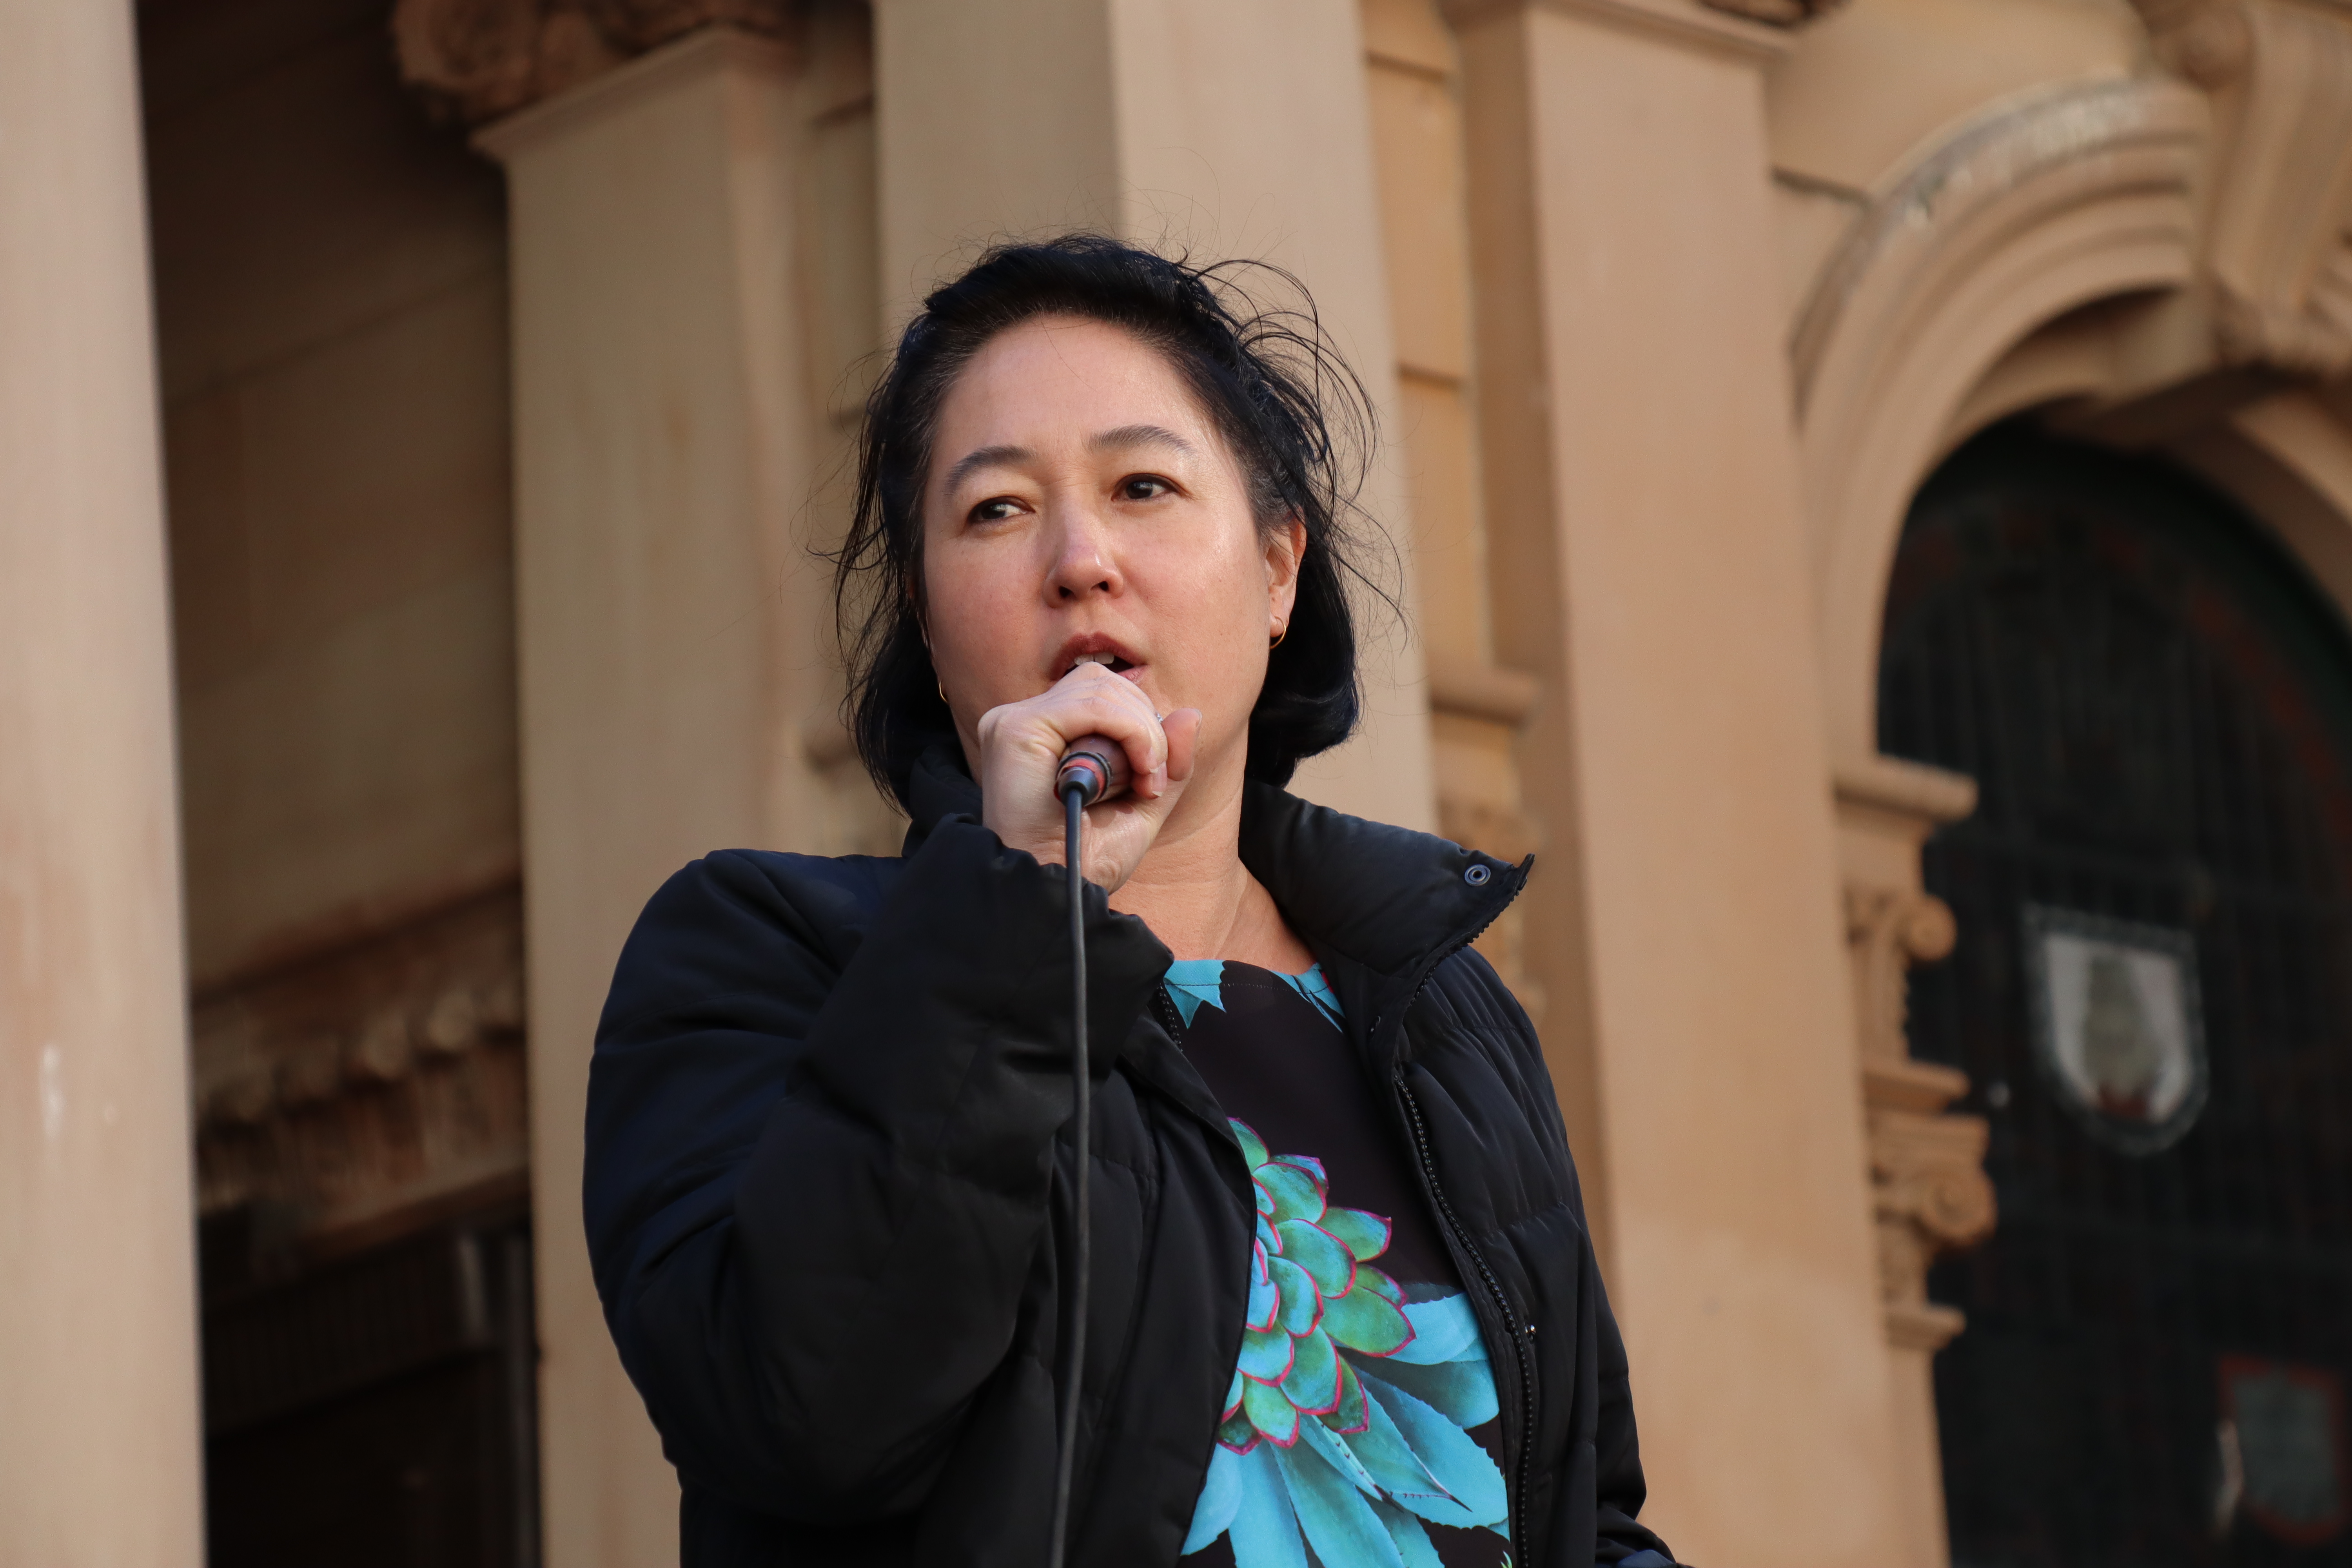 NSW Greens MP Jenny Leong is “sickened by their levels of hate”